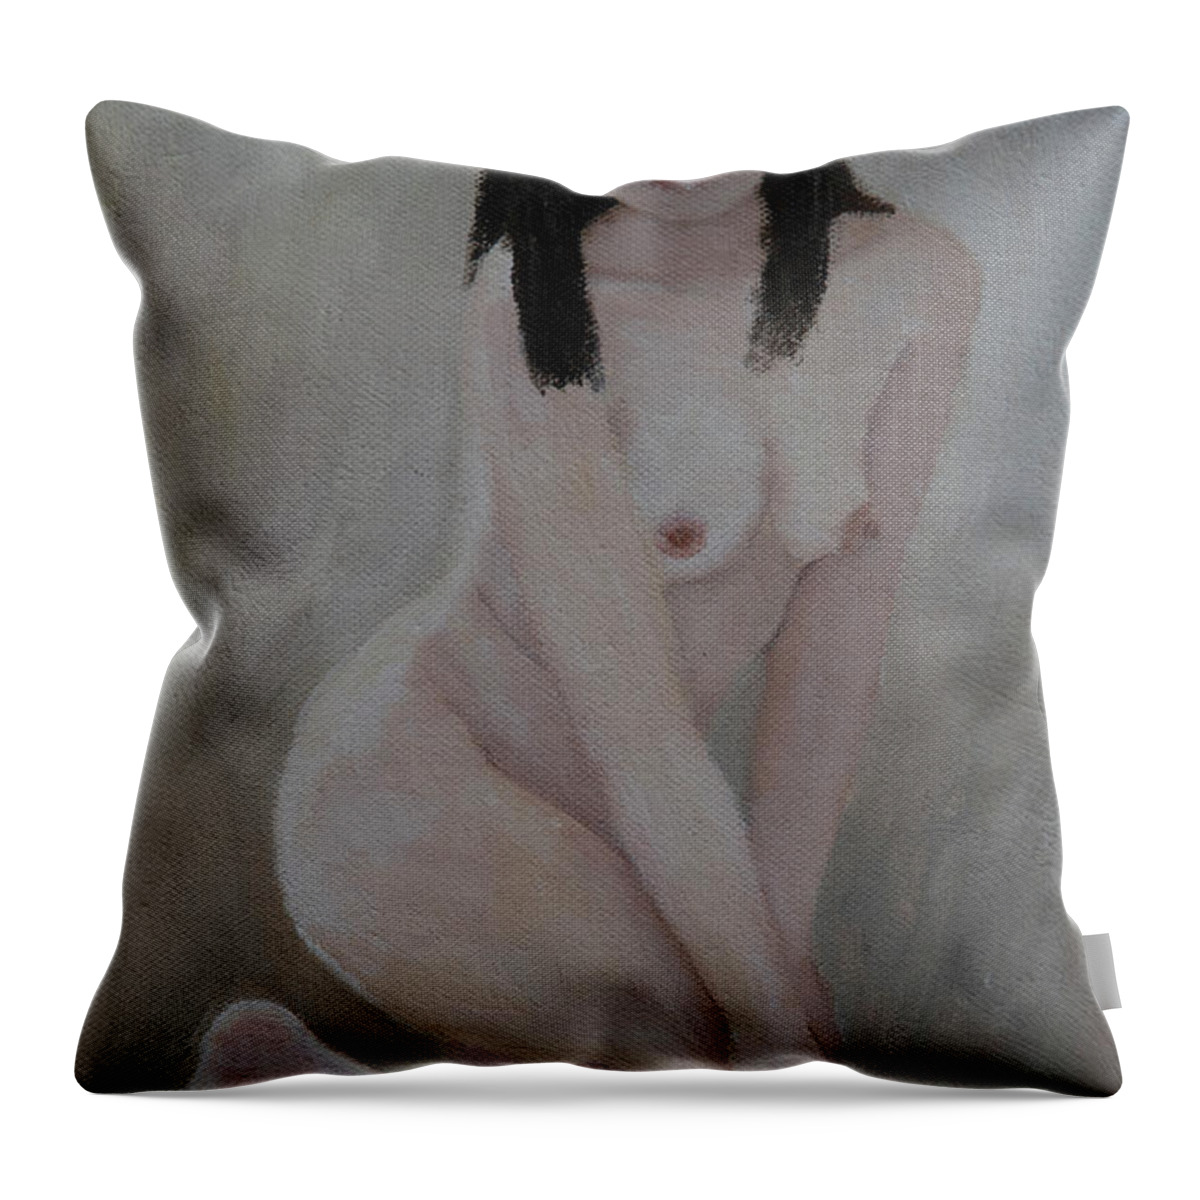 Nude Throw Pillow featuring the painting New Hope by Masami IIDA